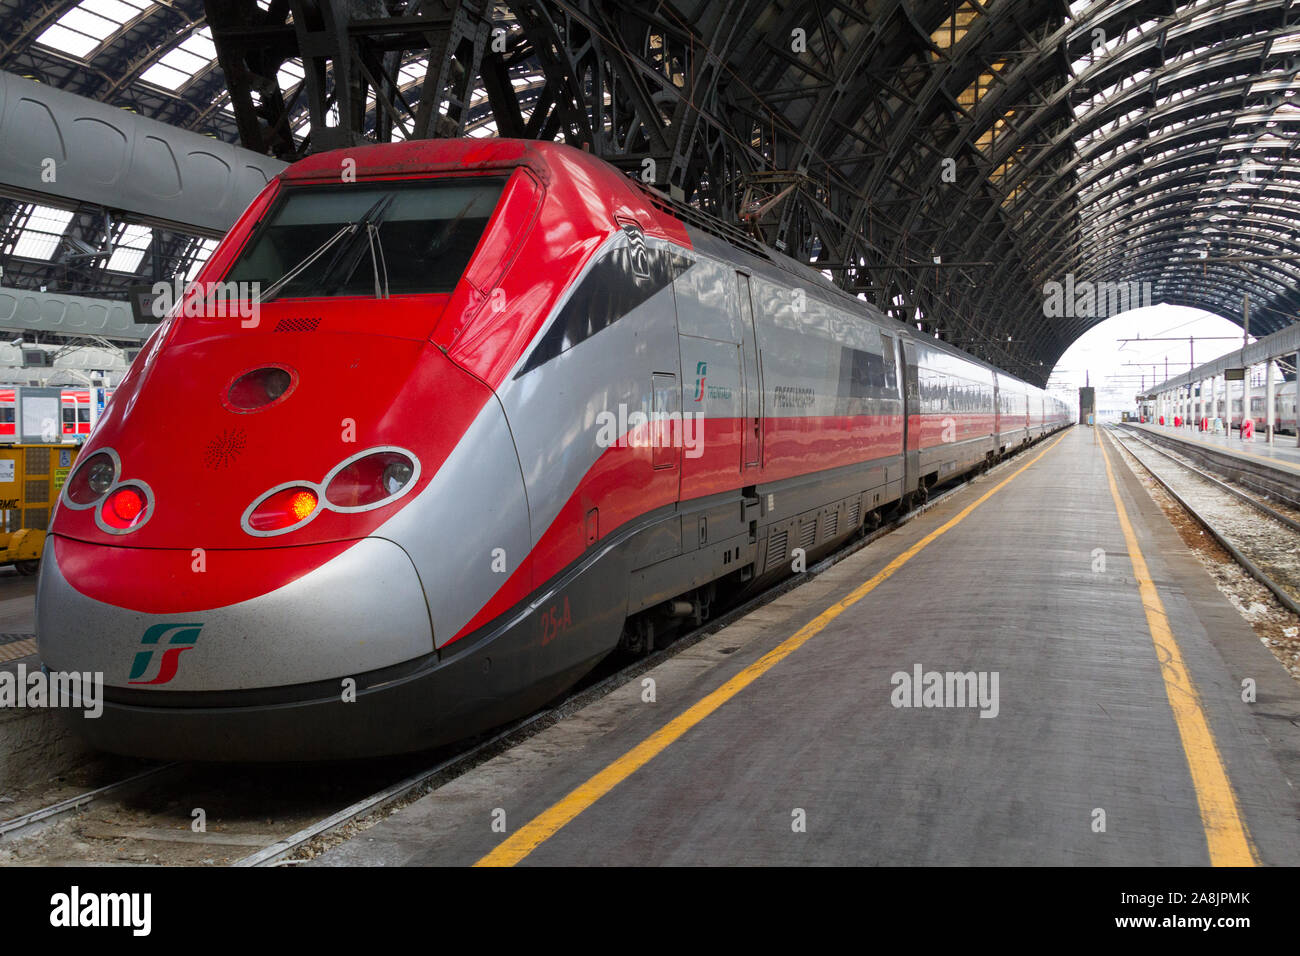 'Frecciarossa', a high-speed Italian train, poised at the Milan Central Station, a major railway hub in Northern Italy. Stock Photo